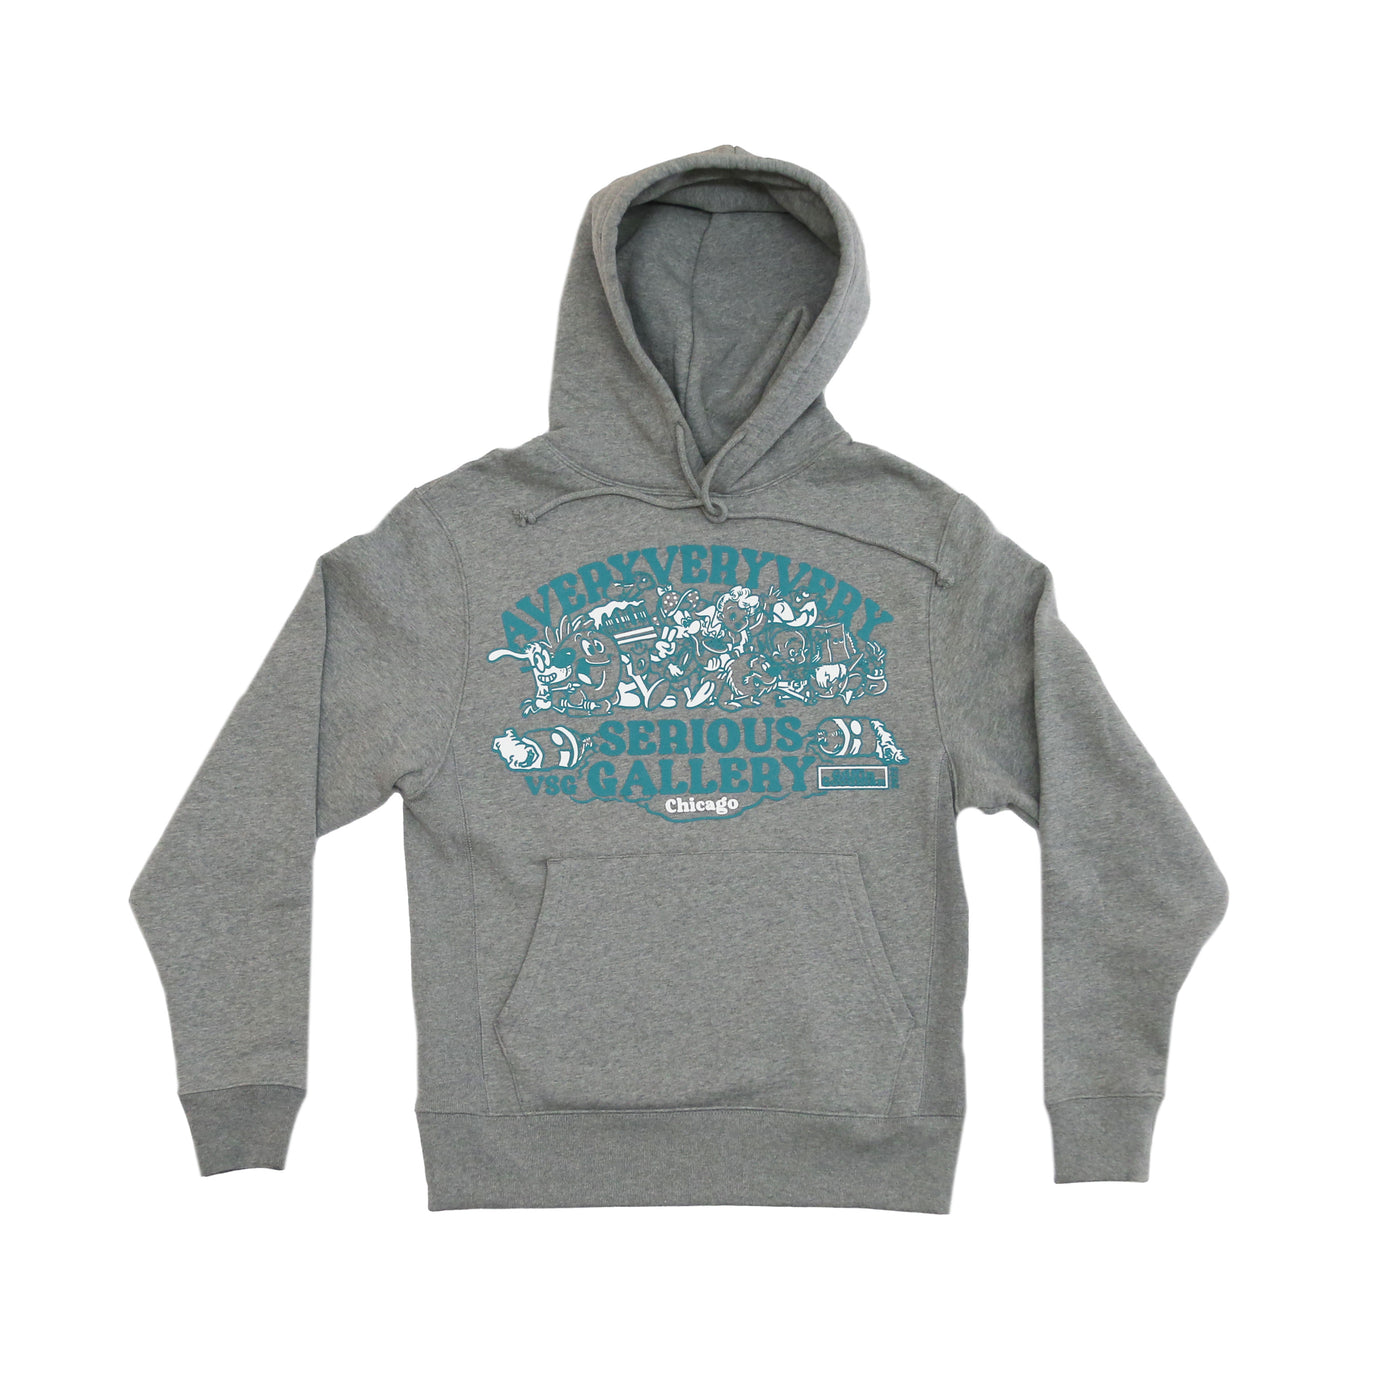 A Very Serious Hoodie, Heavy Weight by Griffin Goodman